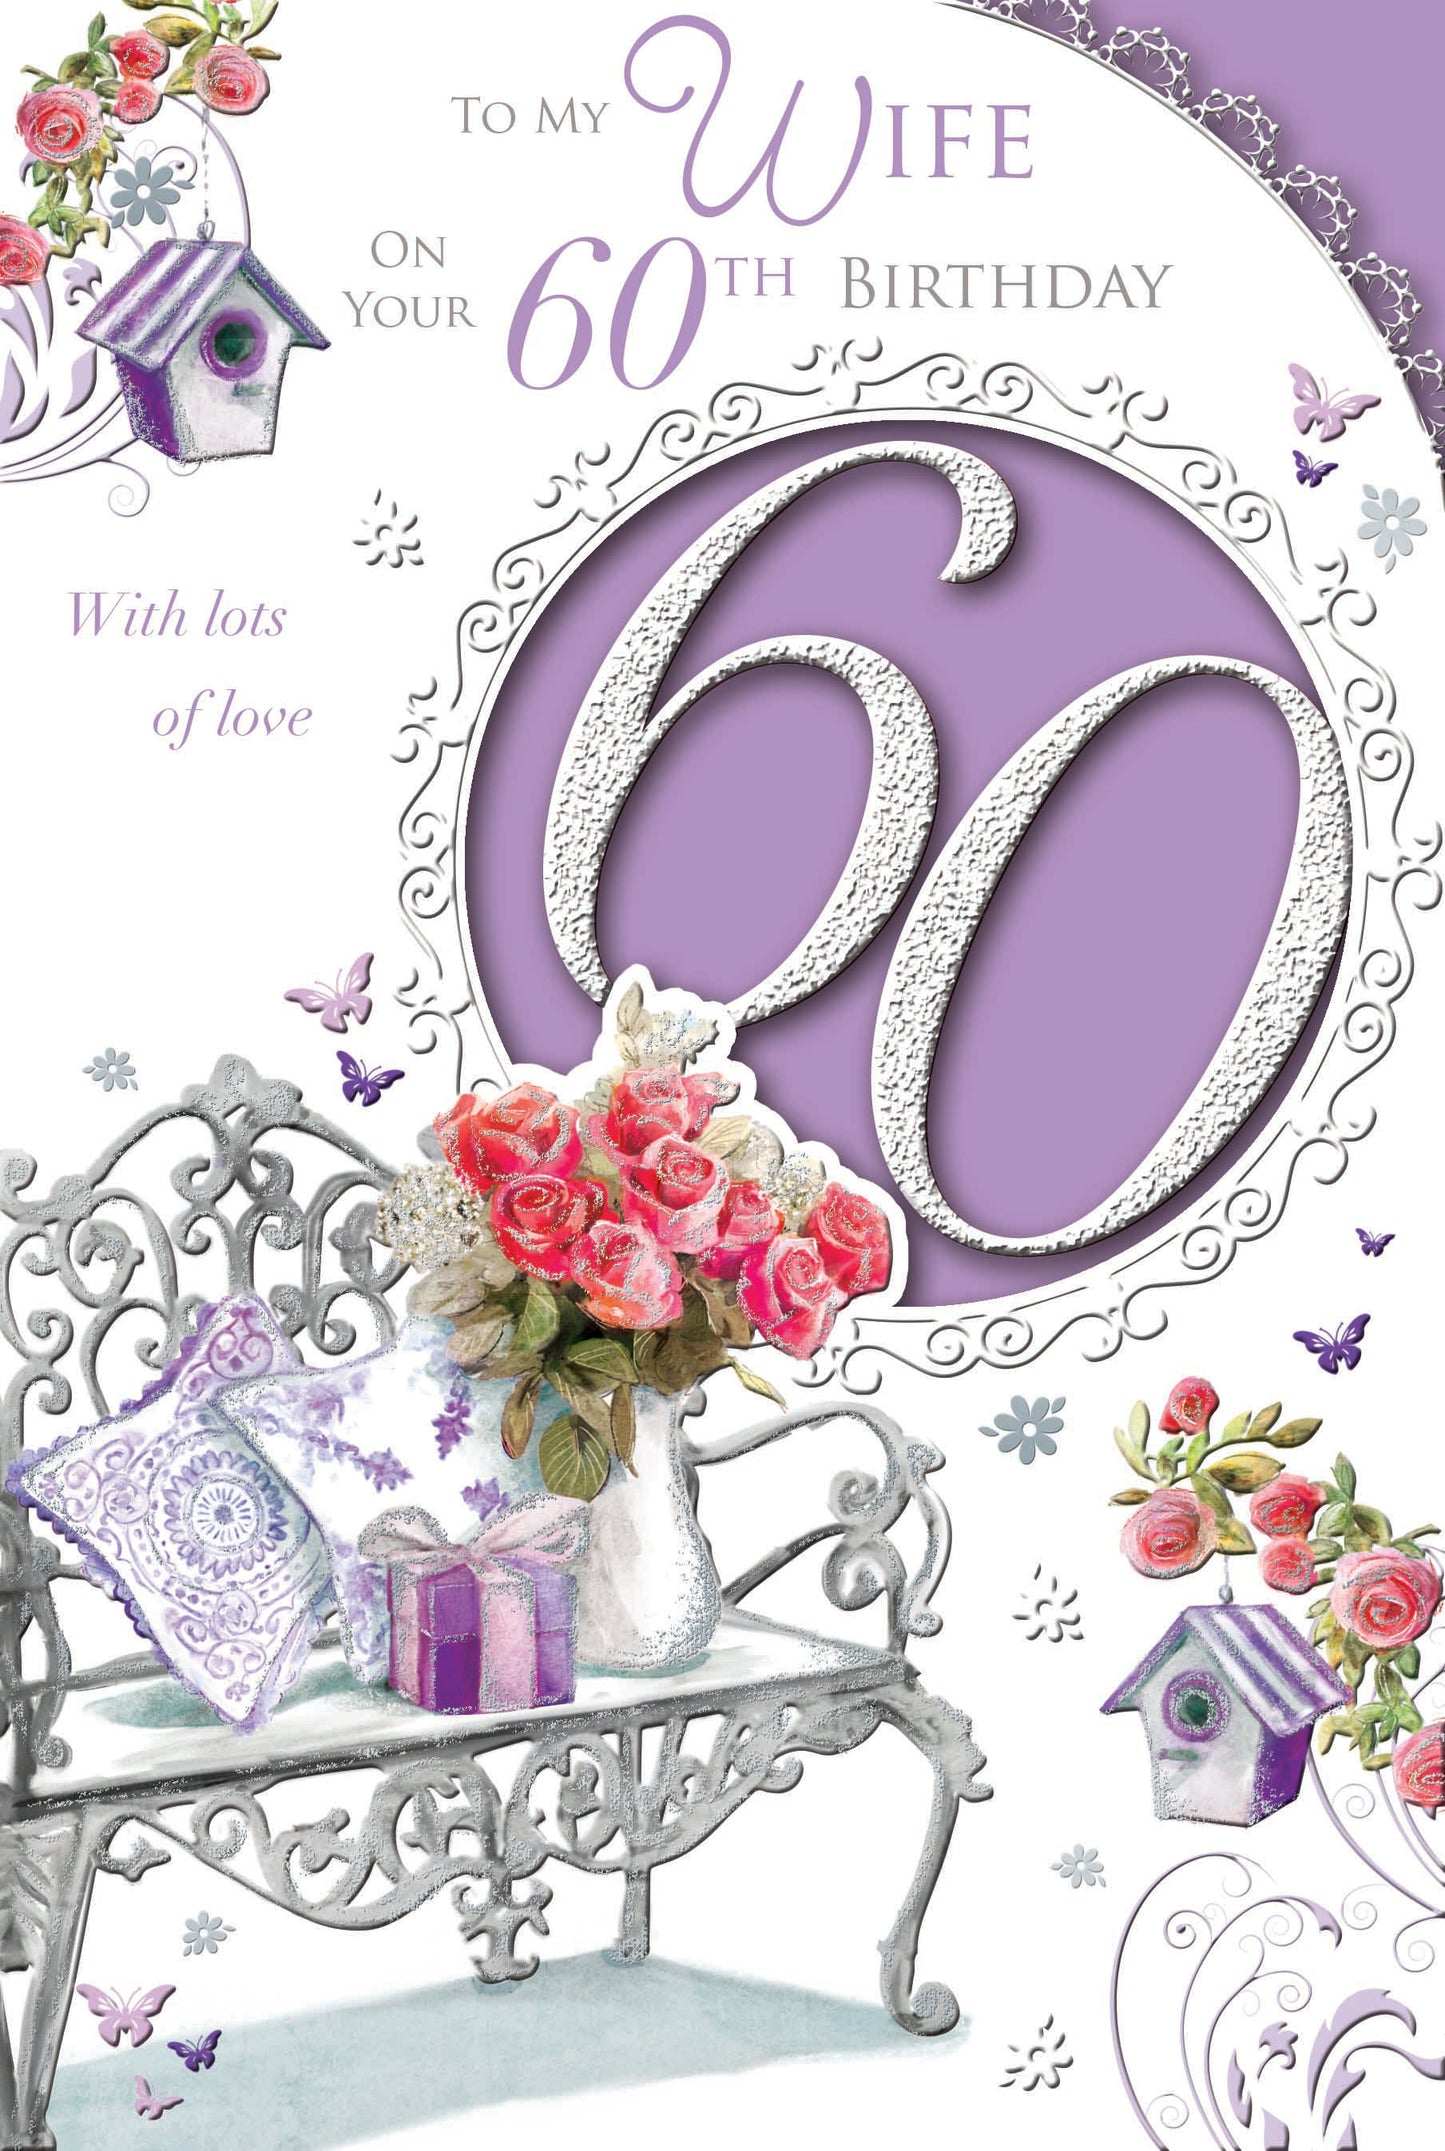 To My Wife On Your 60th With Lots of Love Birthday Celebrity Style Card